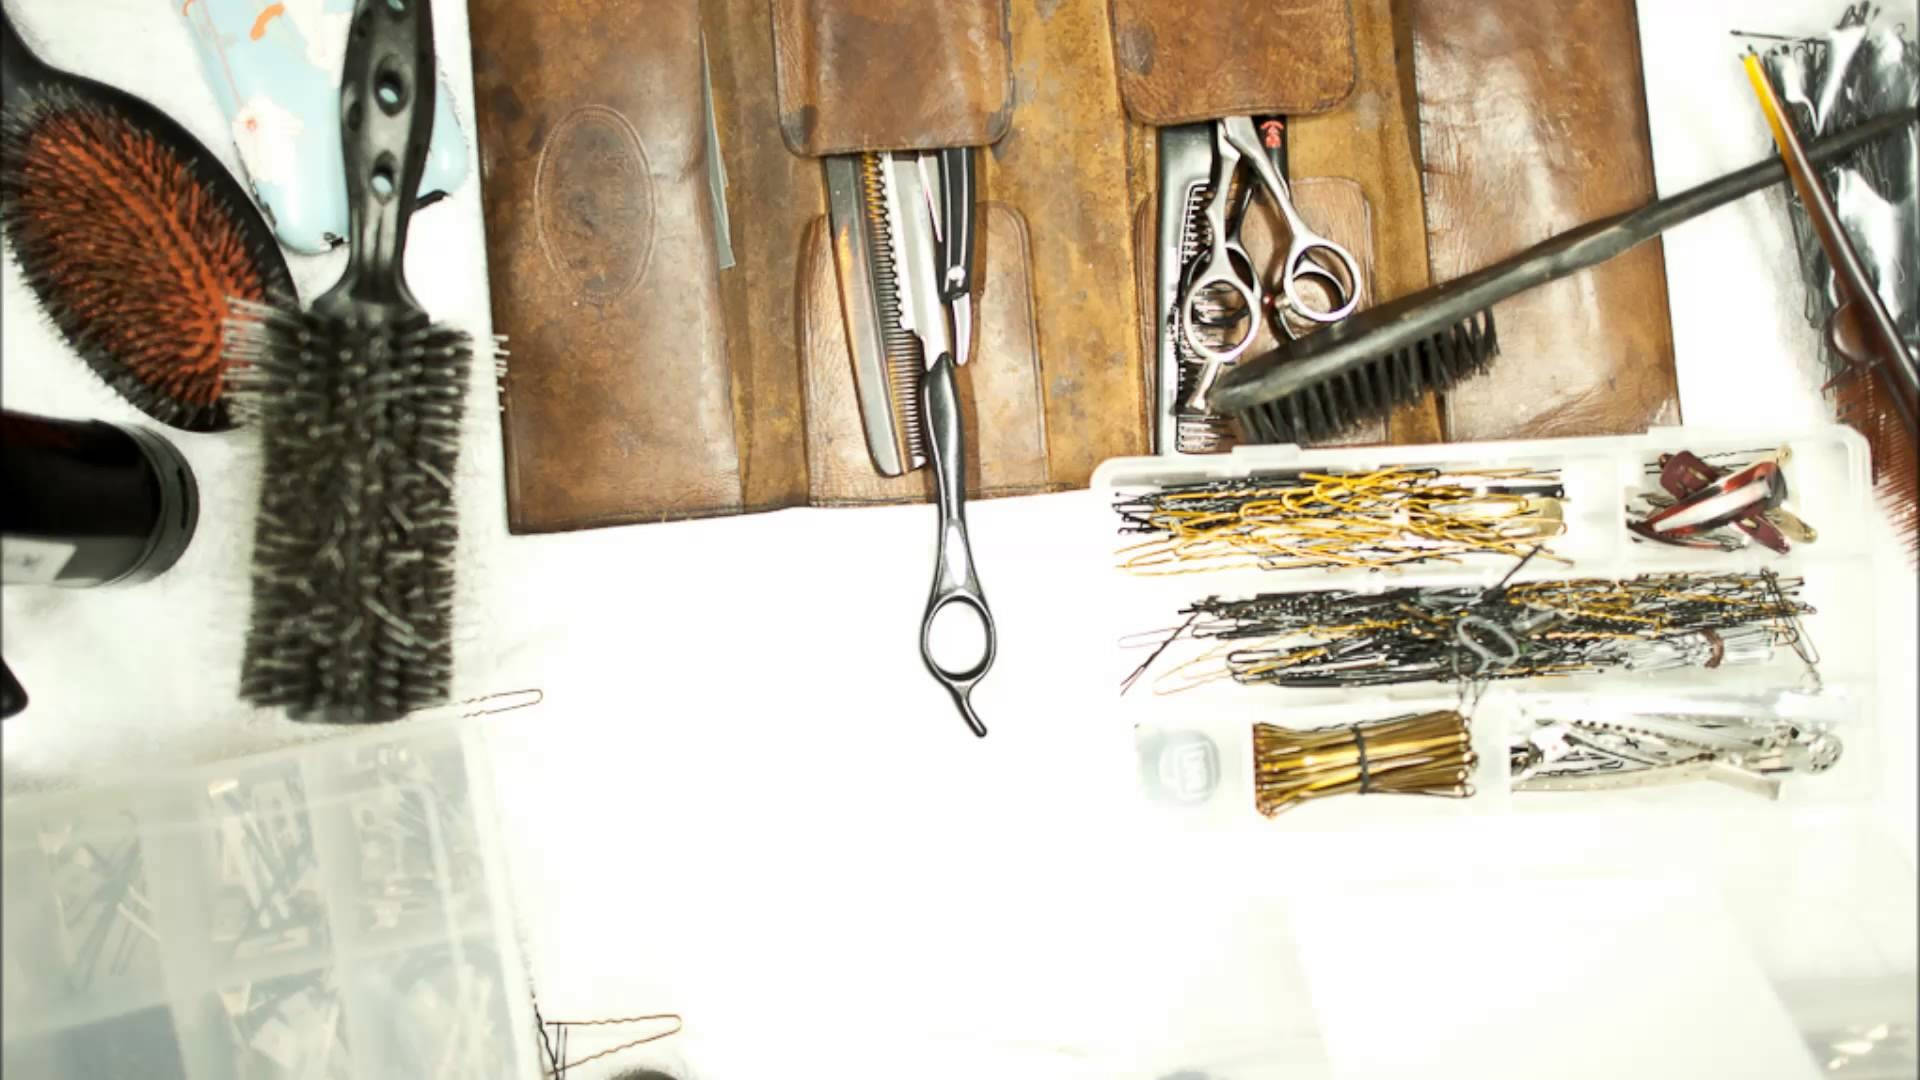 Haircut Tools In Leather Bag